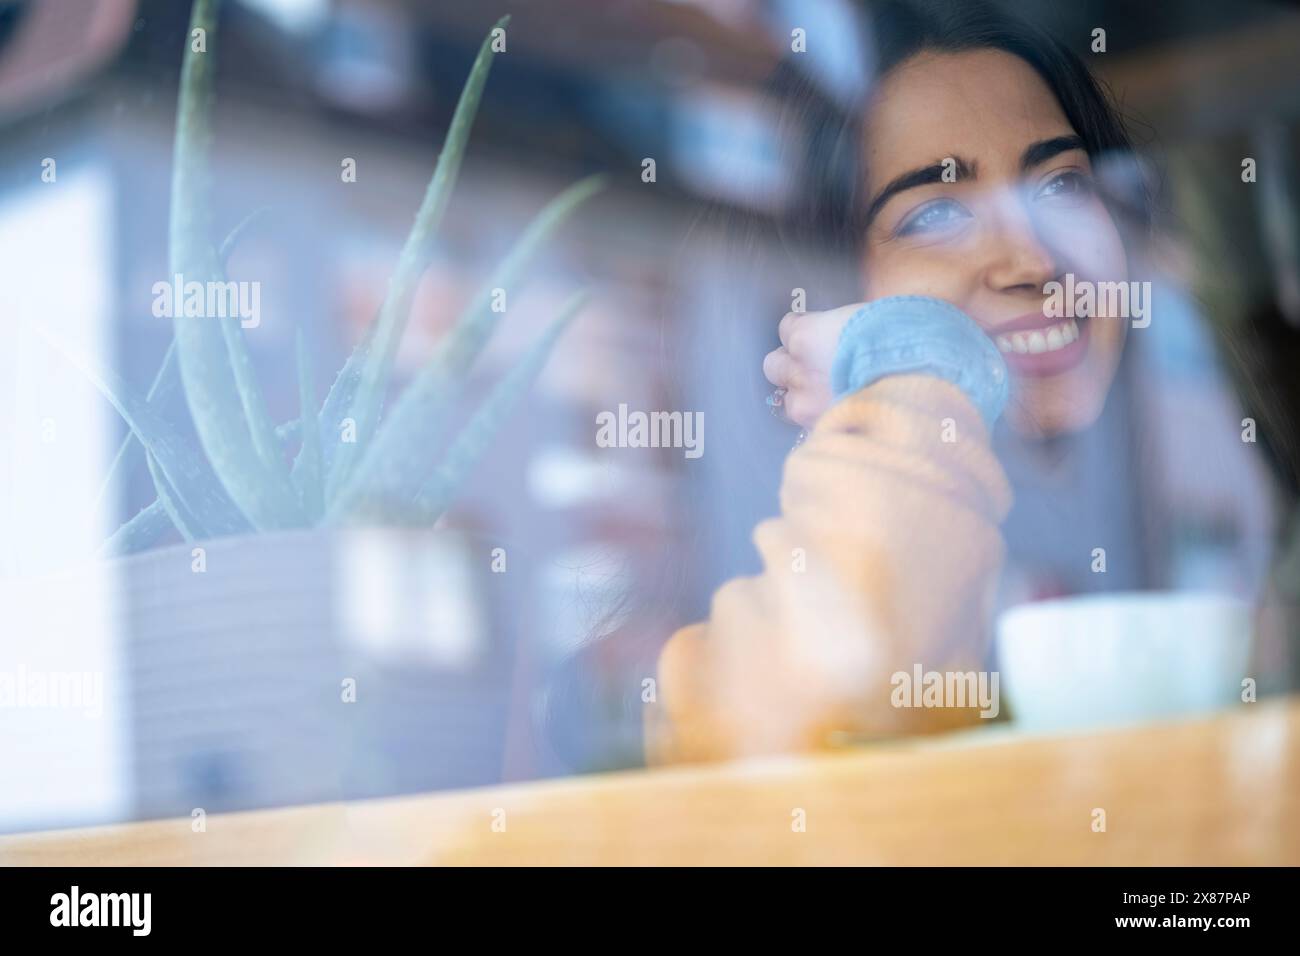 Smiling woman at cafe seen through glass window Stock Photo